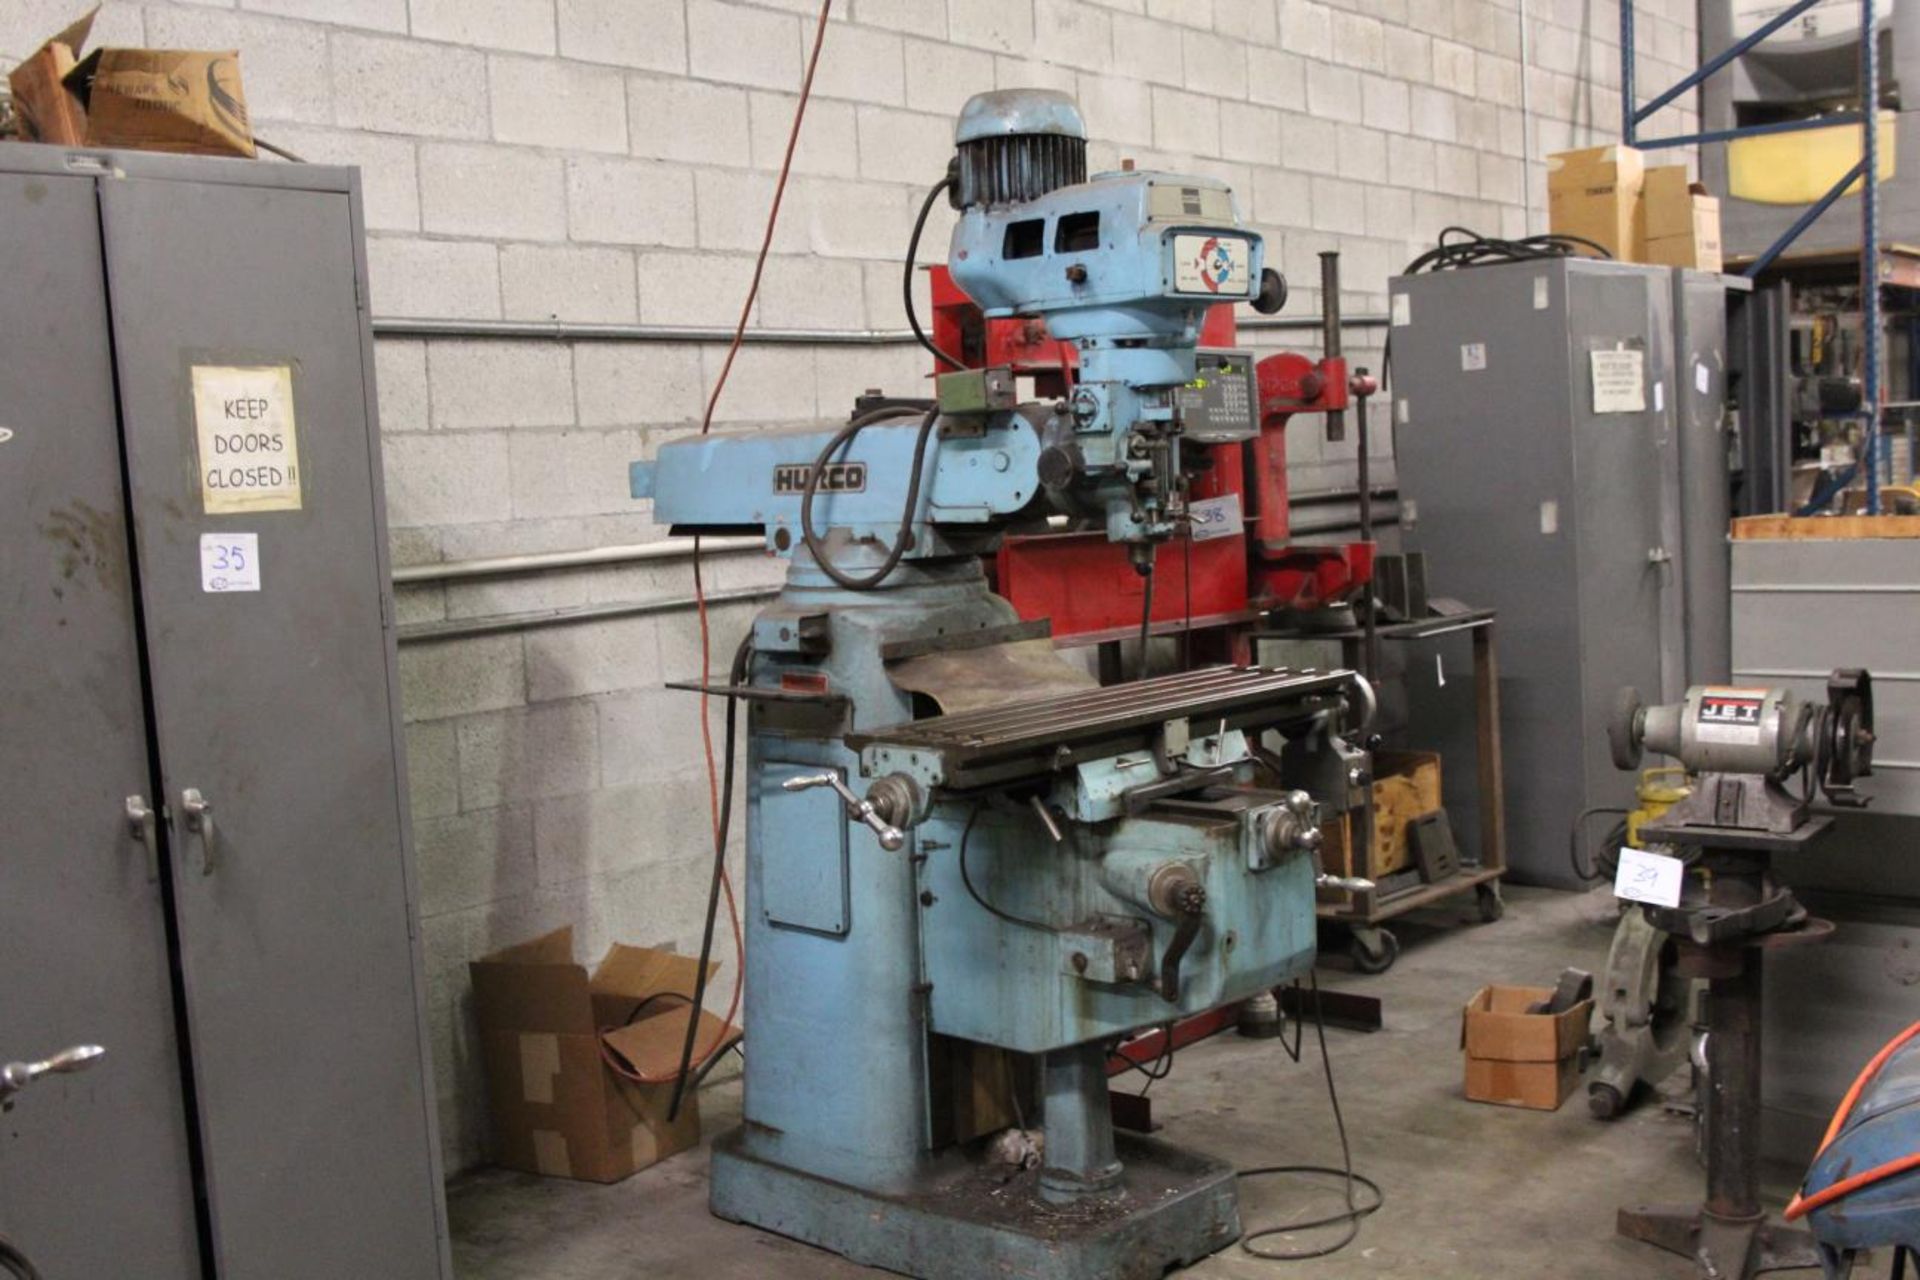 Hurco SM1 Vertical Milling Machine  R8 Spindle, 60-4000 RPM, 12 x 42" Table,  Includes Unique DRO, - Image 6 of 6